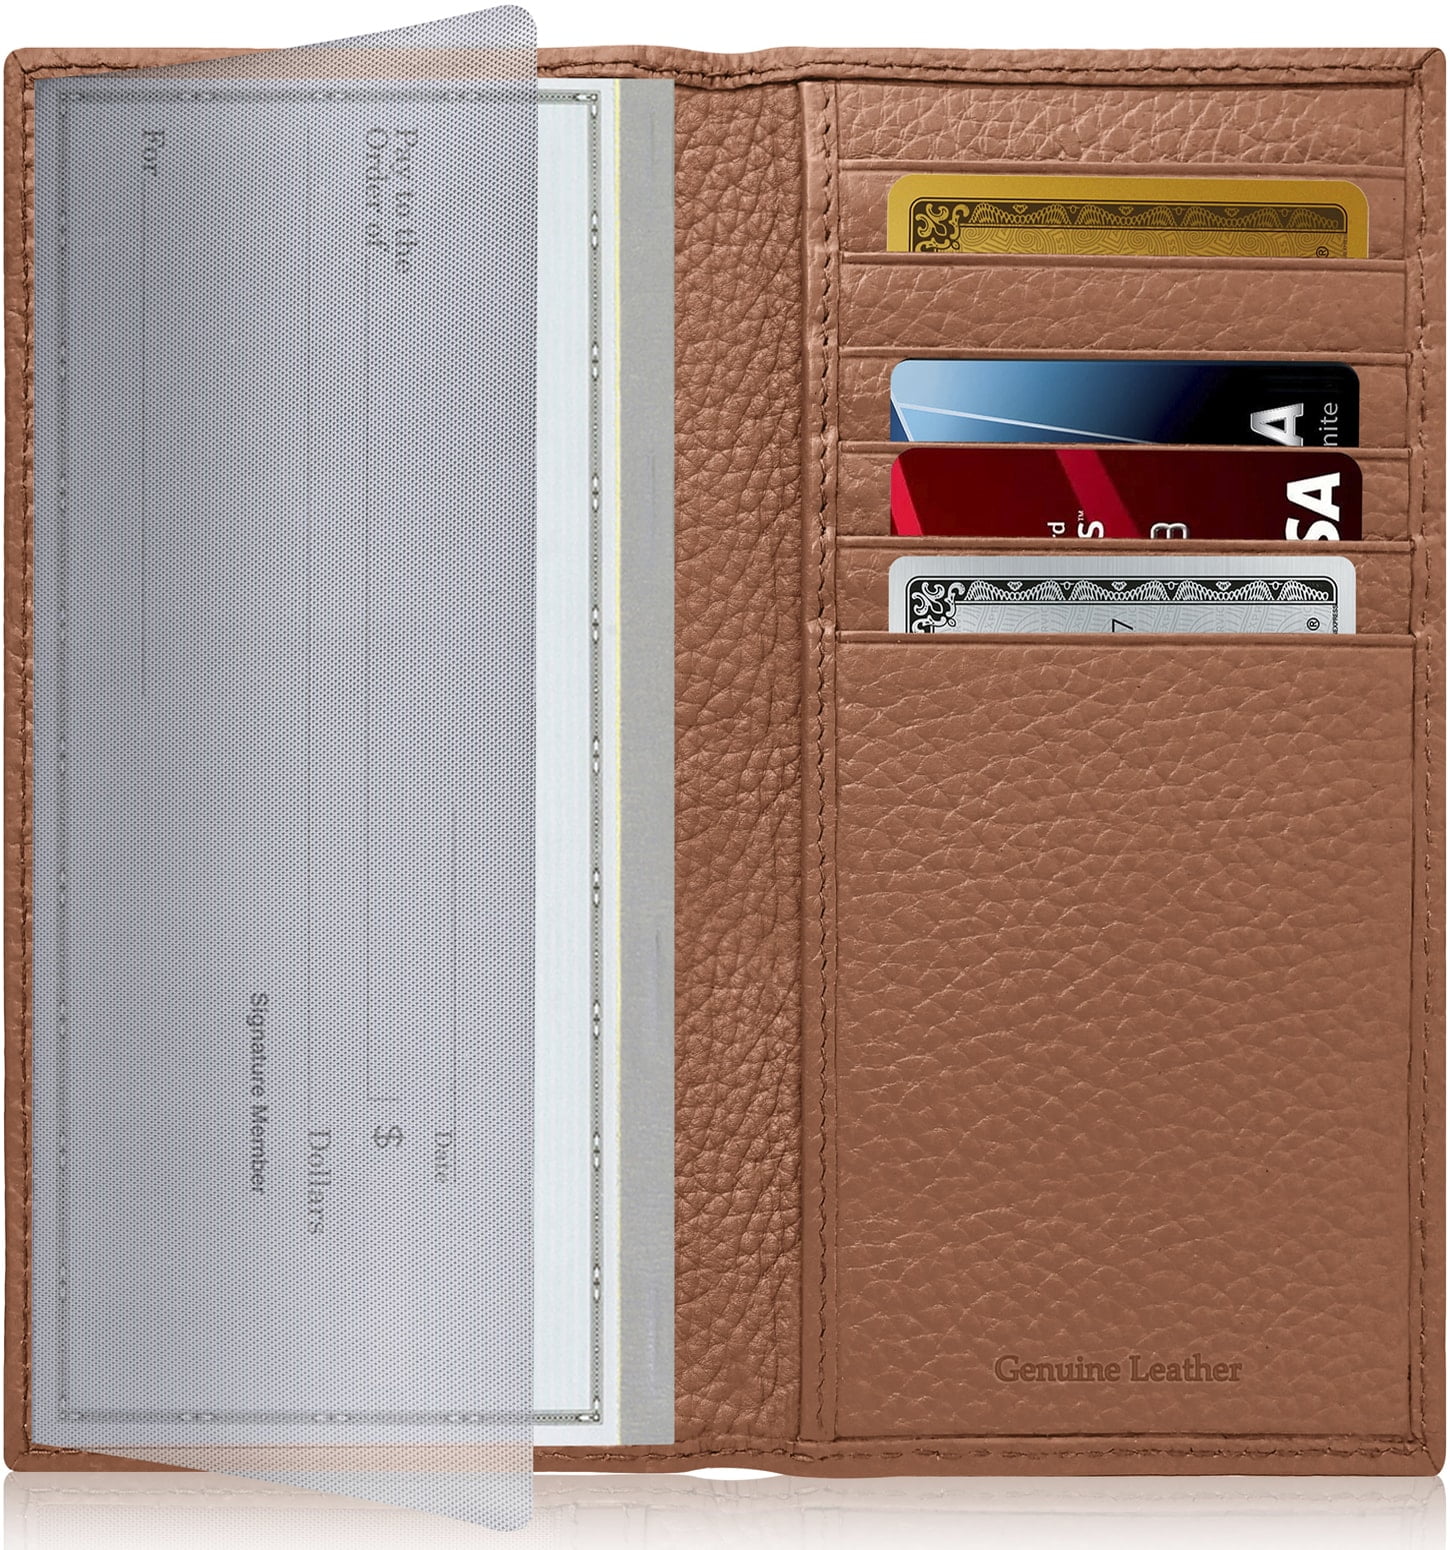 Brown Leather Checkbook Cover ID Card Holder Clutch Wallet For Men Women 